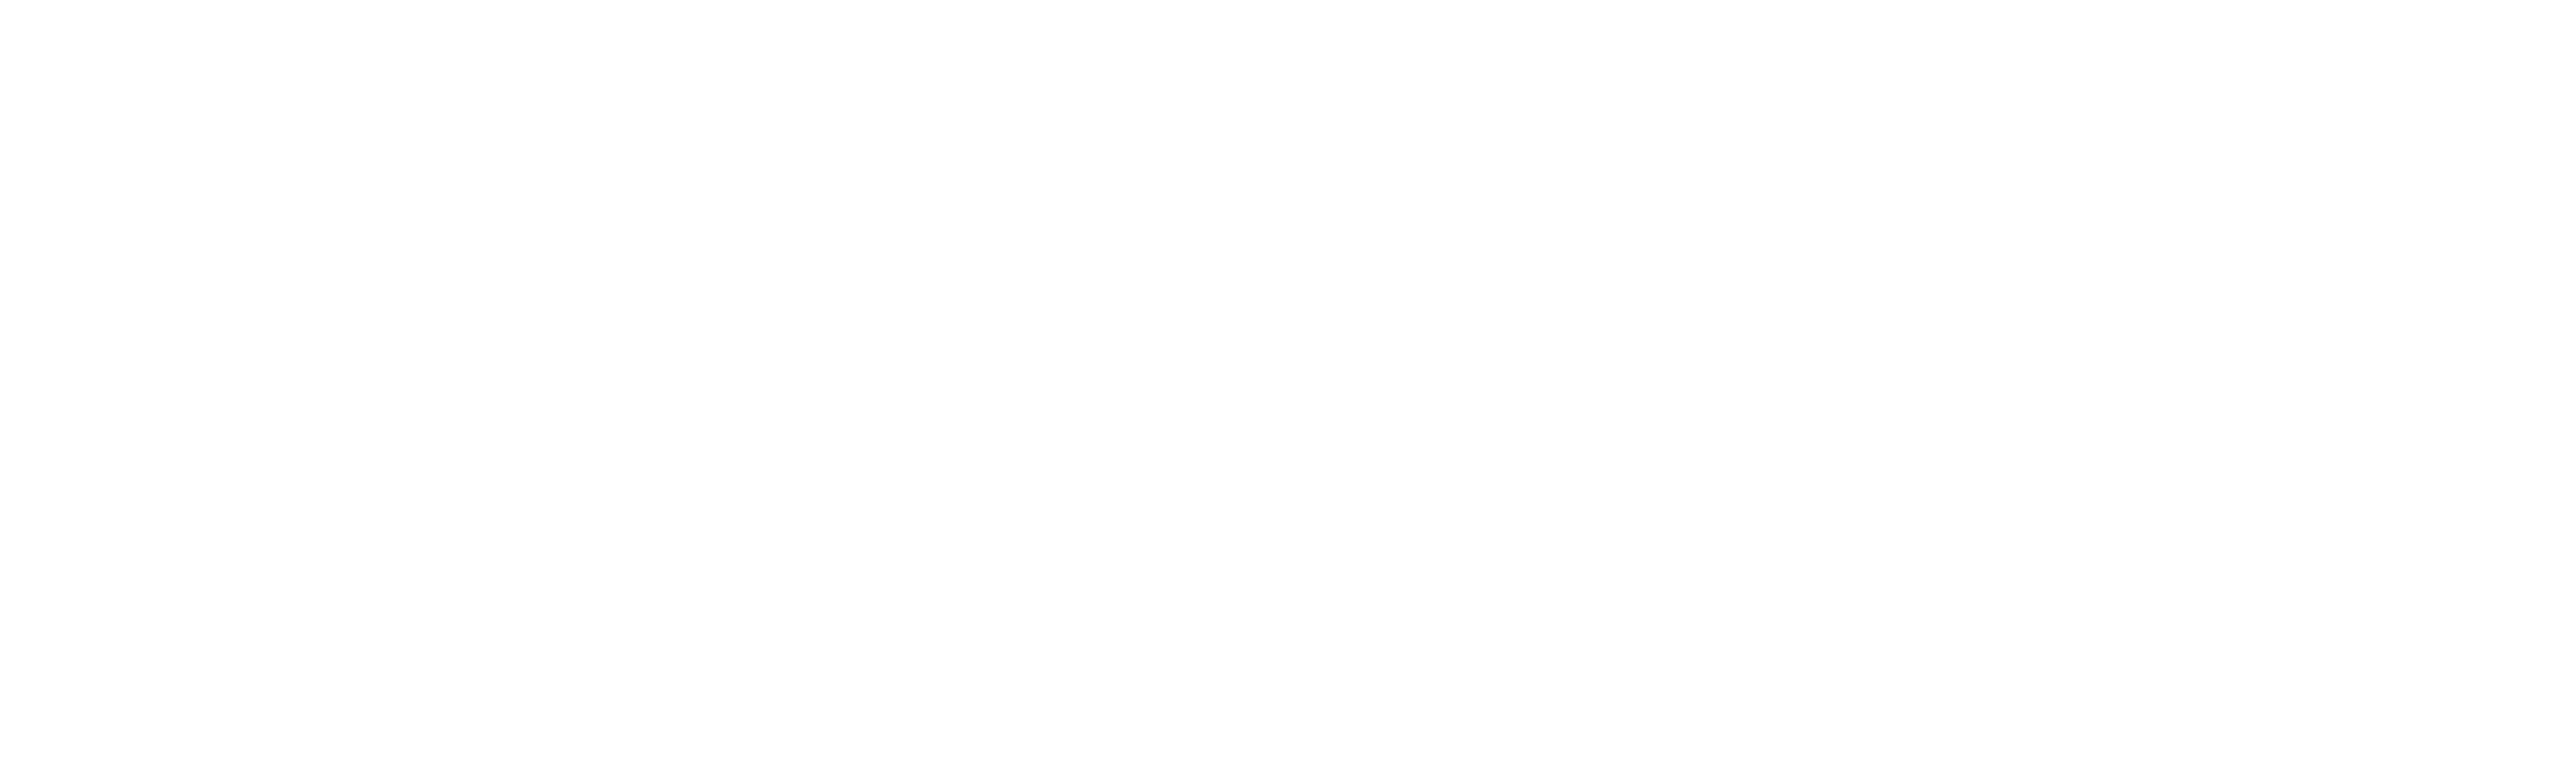 Western Digital quote about SOLIDWORKS Plastics and GoEngineer